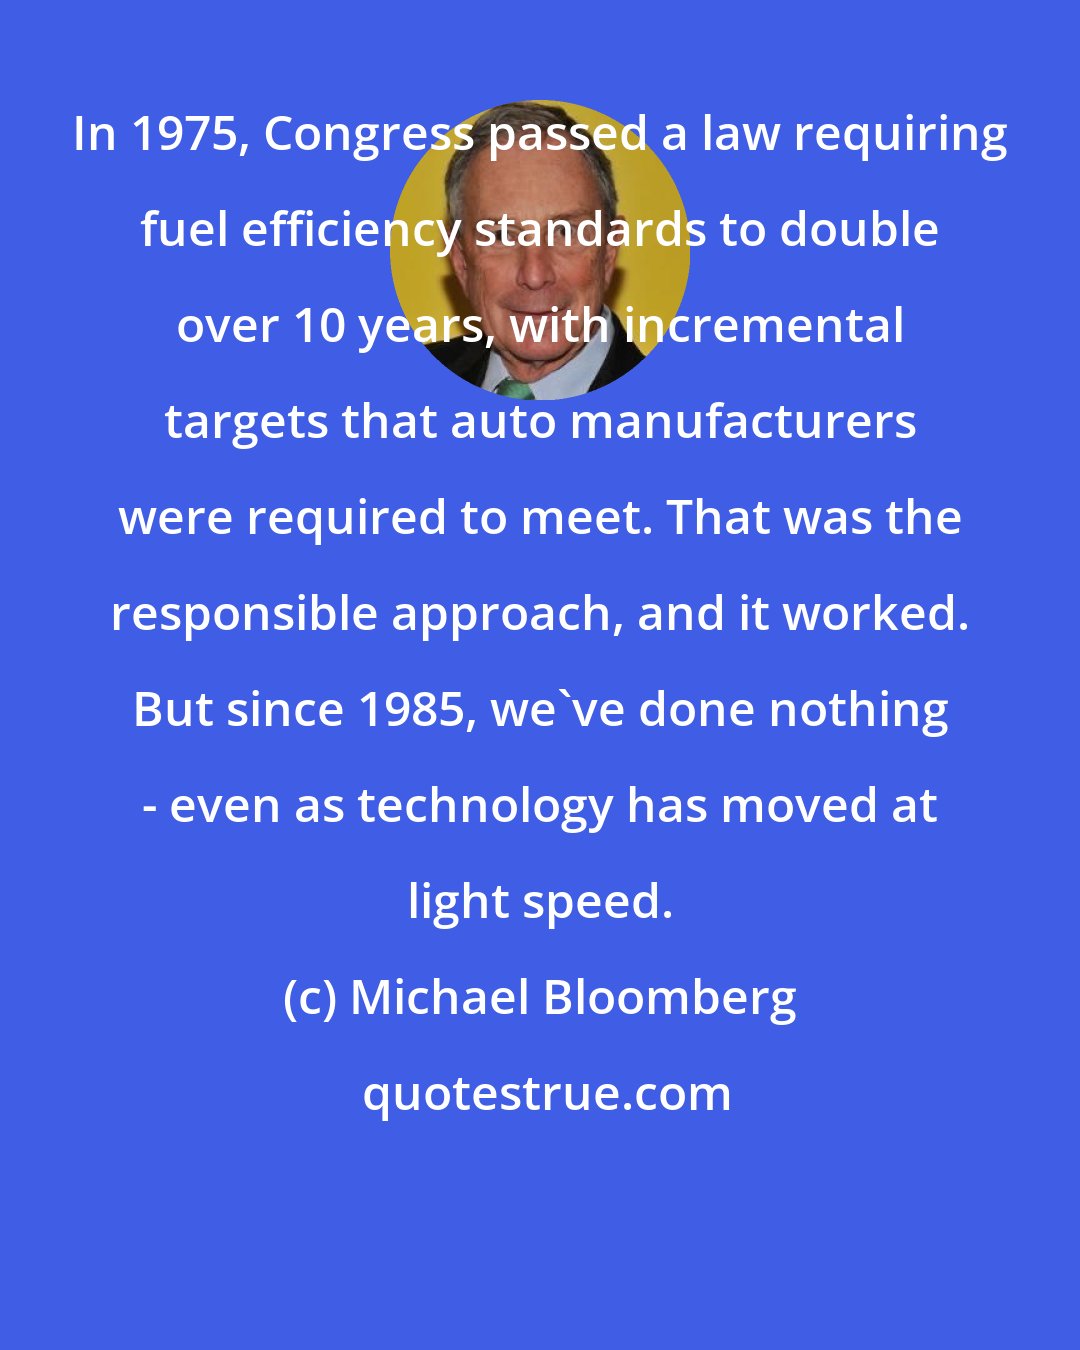 Michael Bloomberg: In 1975, Congress passed a law requiring fuel efficiency standards to double over 10 years, with incremental targets that auto manufacturers were required to meet. That was the responsible approach, and it worked. But since 1985, we've done nothing - even as technology has moved at light speed.